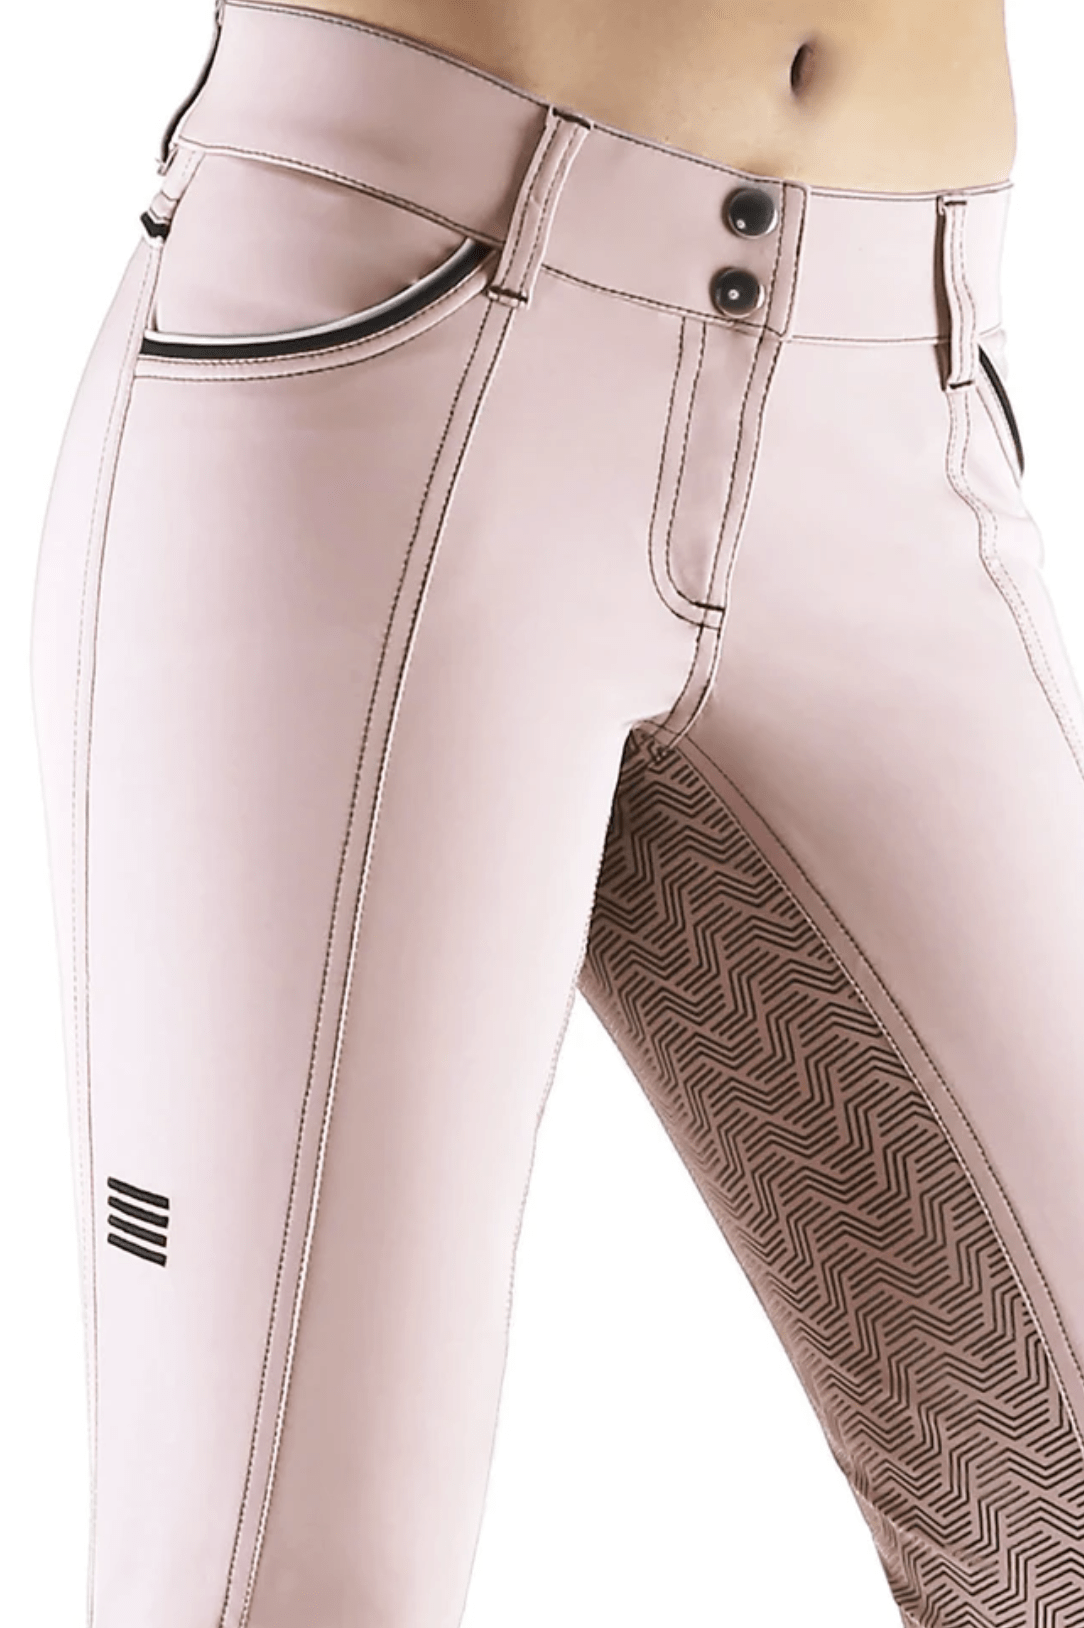 GhoDho Breeches GhoDho Adena Full Seat Breeches equestrian team apparel online tack store mobile tack store custom farm apparel custom show stable clothing equestrian lifestyle horse show clothing riding clothes horses equestrian tack store